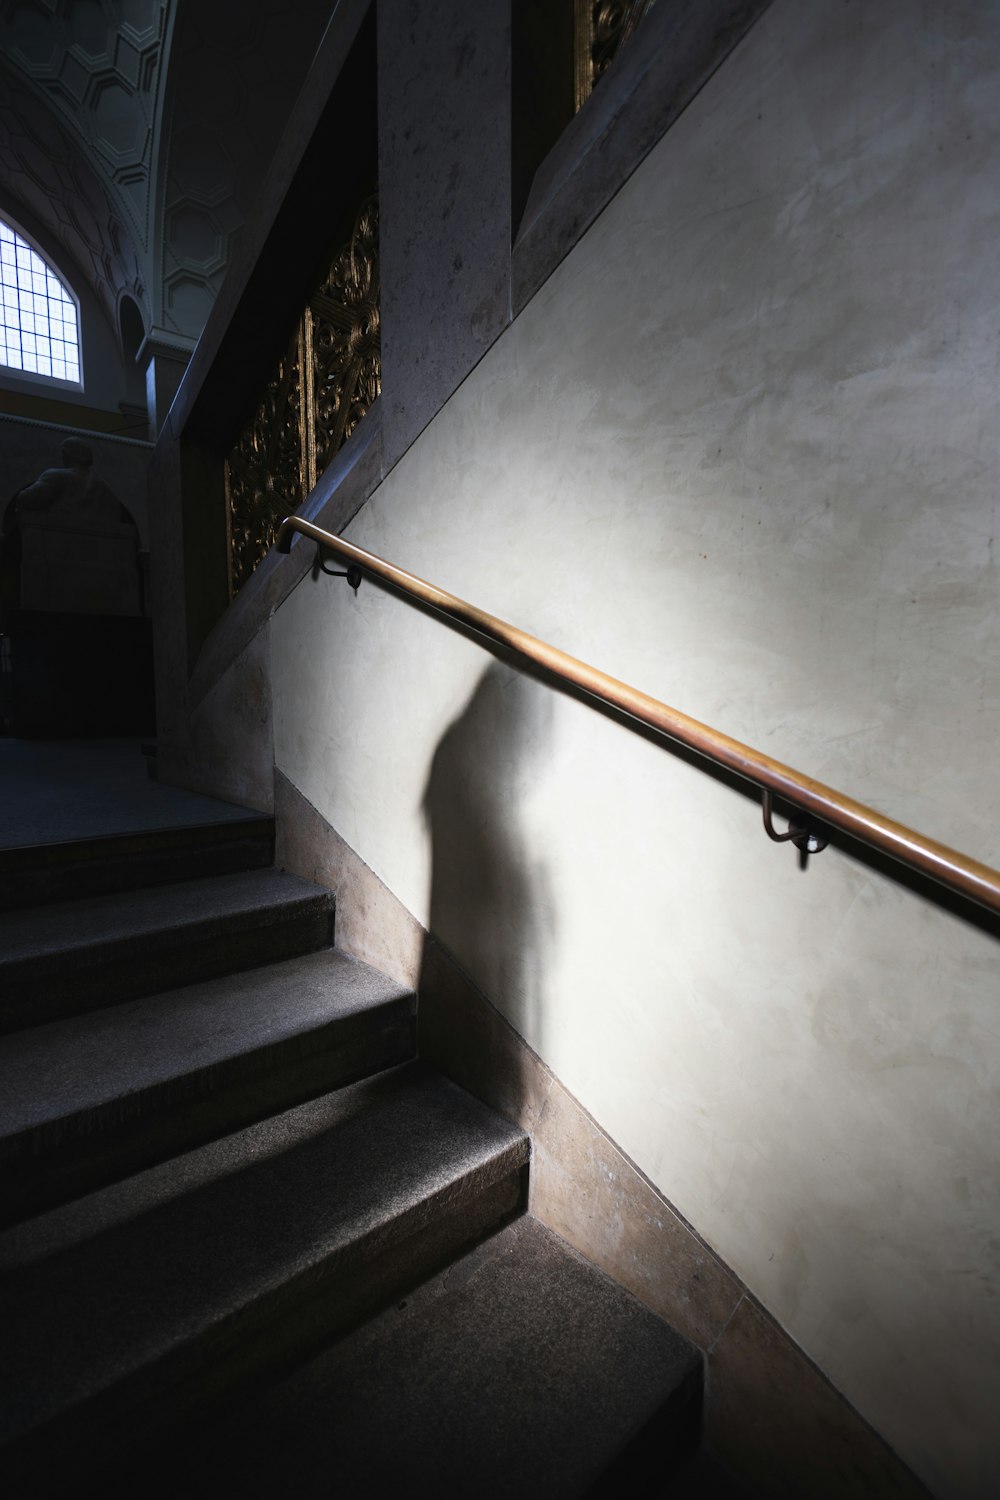 a shadow of a person on a stair case